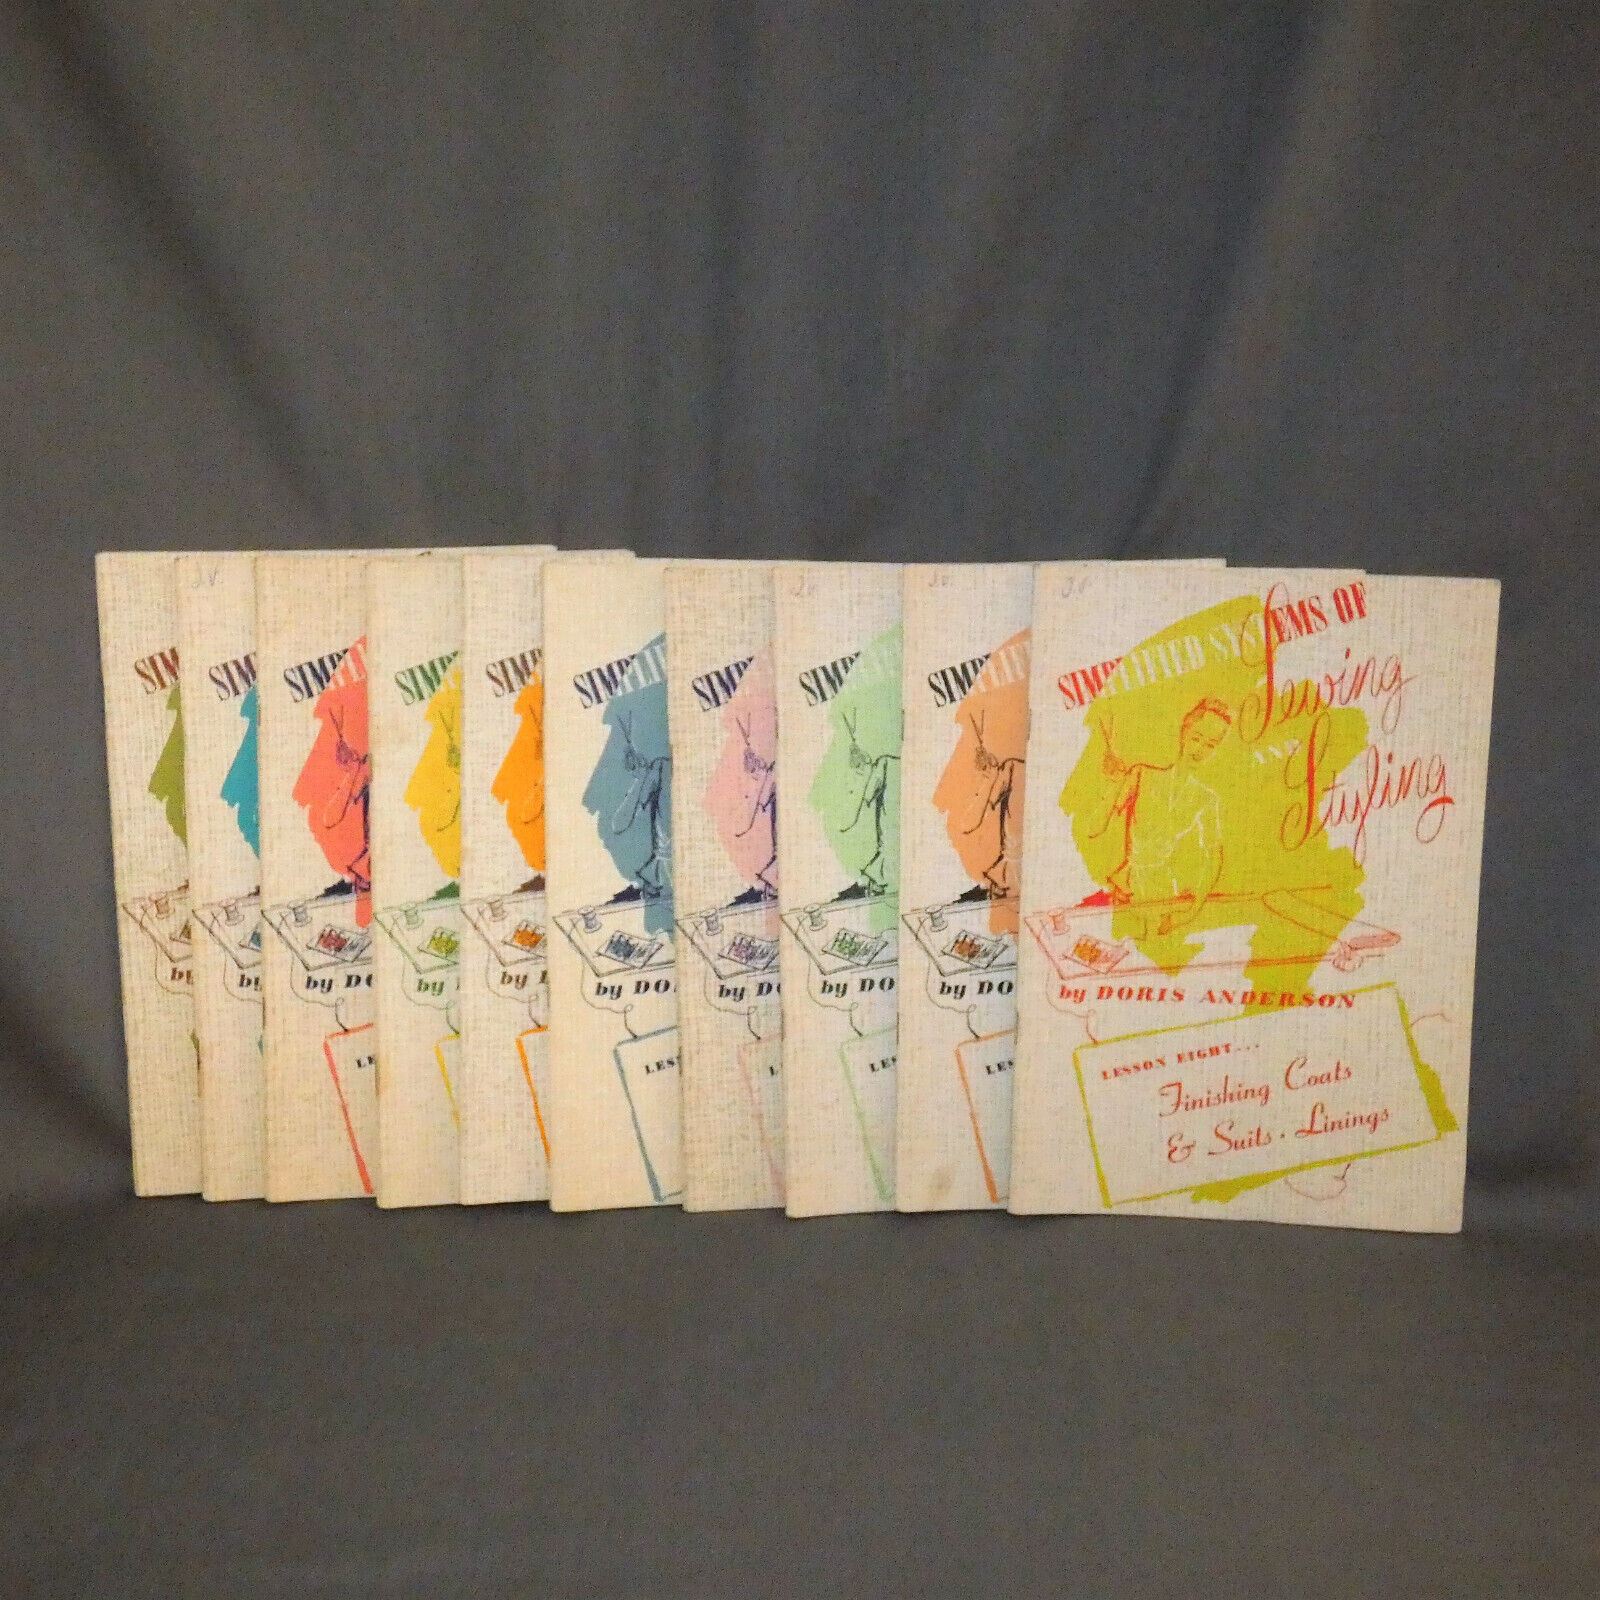 Vintage Simplified Systems of Sewing & Styling 10 Book Set Doris Anderson 1948